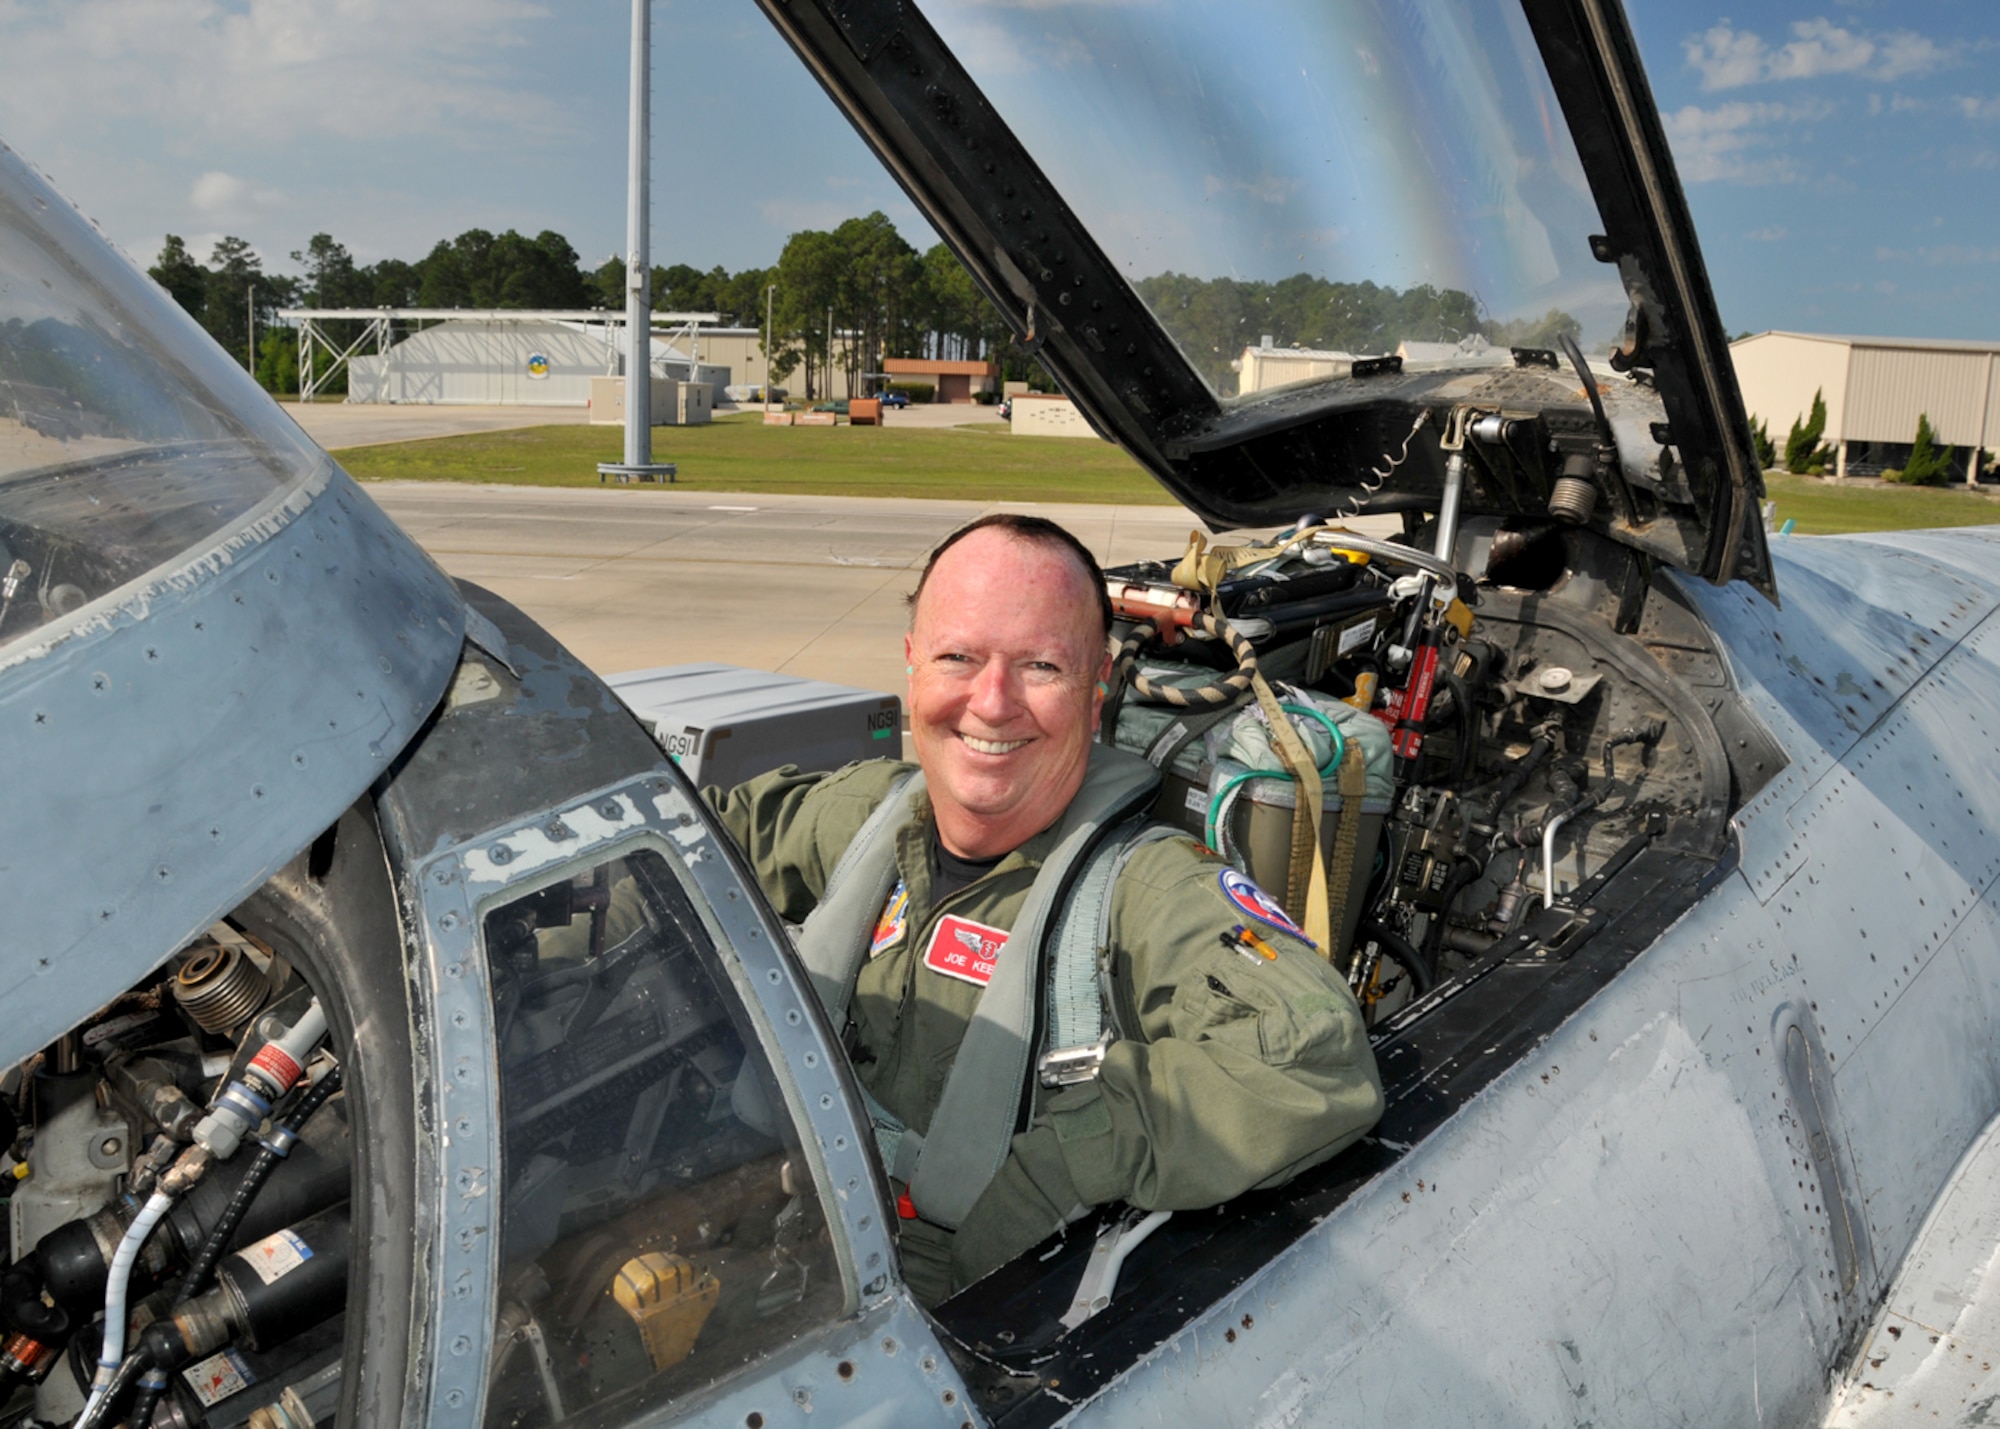 Major Joseph Keenan a flight surgeon with, the 104th Fighter Wing, Massachusetts Air National Guard shows his satisfaction following an incentive ride in an F-4 Phantom while deployed to Tyndall AFB Florida, in support of the Weapons System Evaluation Program (WSEP) on April 12, 2011. The two week training and evaluation program is important for ground crews to test their maintenance systems and processes while loading live munitions on F-15 Eagles, as well as critical live training for the F-15 pilots to employ air-to-air missiles against real world targets including unmanned F-4s.